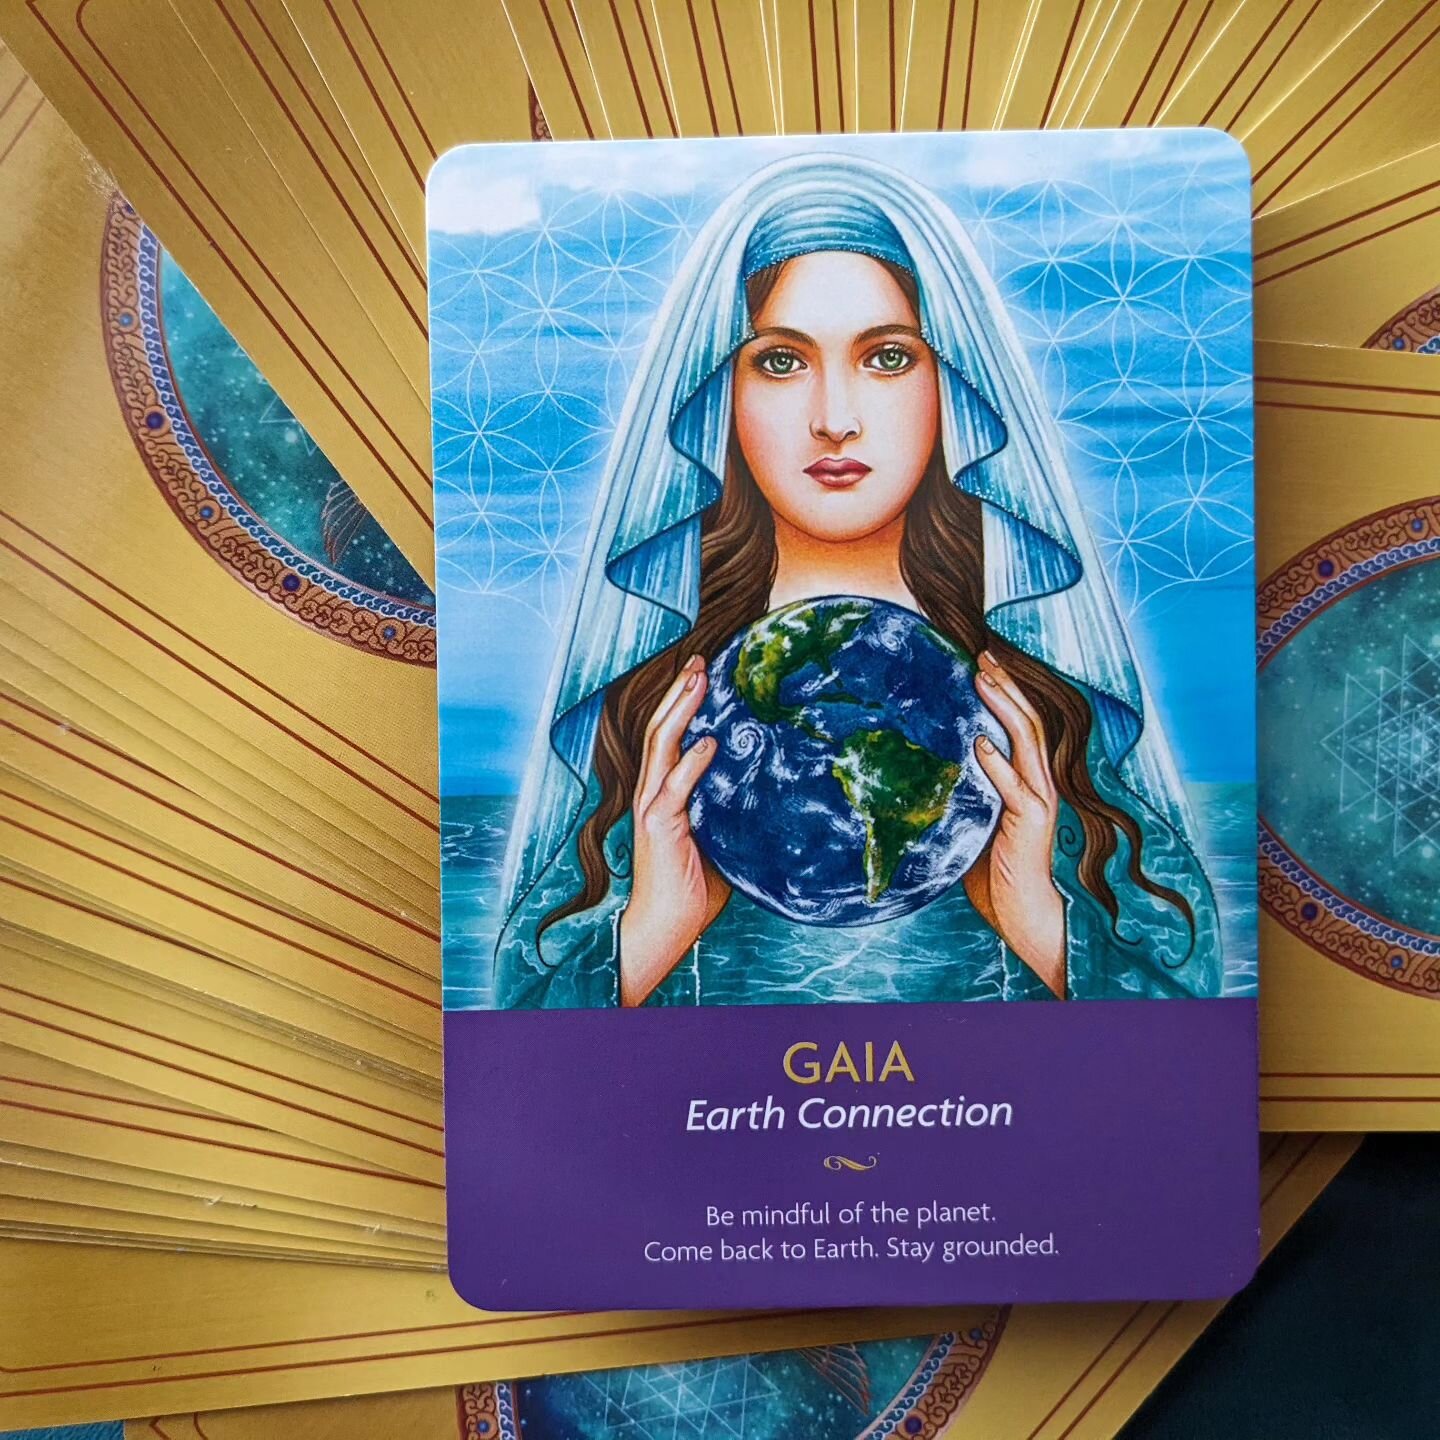 On the subject of Card Reading...

Here's a reading for you today. 🧡🤗

See how Gaia holds the earth in her hands. Are you holding on to what enables you to remain grounded? Are you tapping into the infinite motherly source that offers unconditional